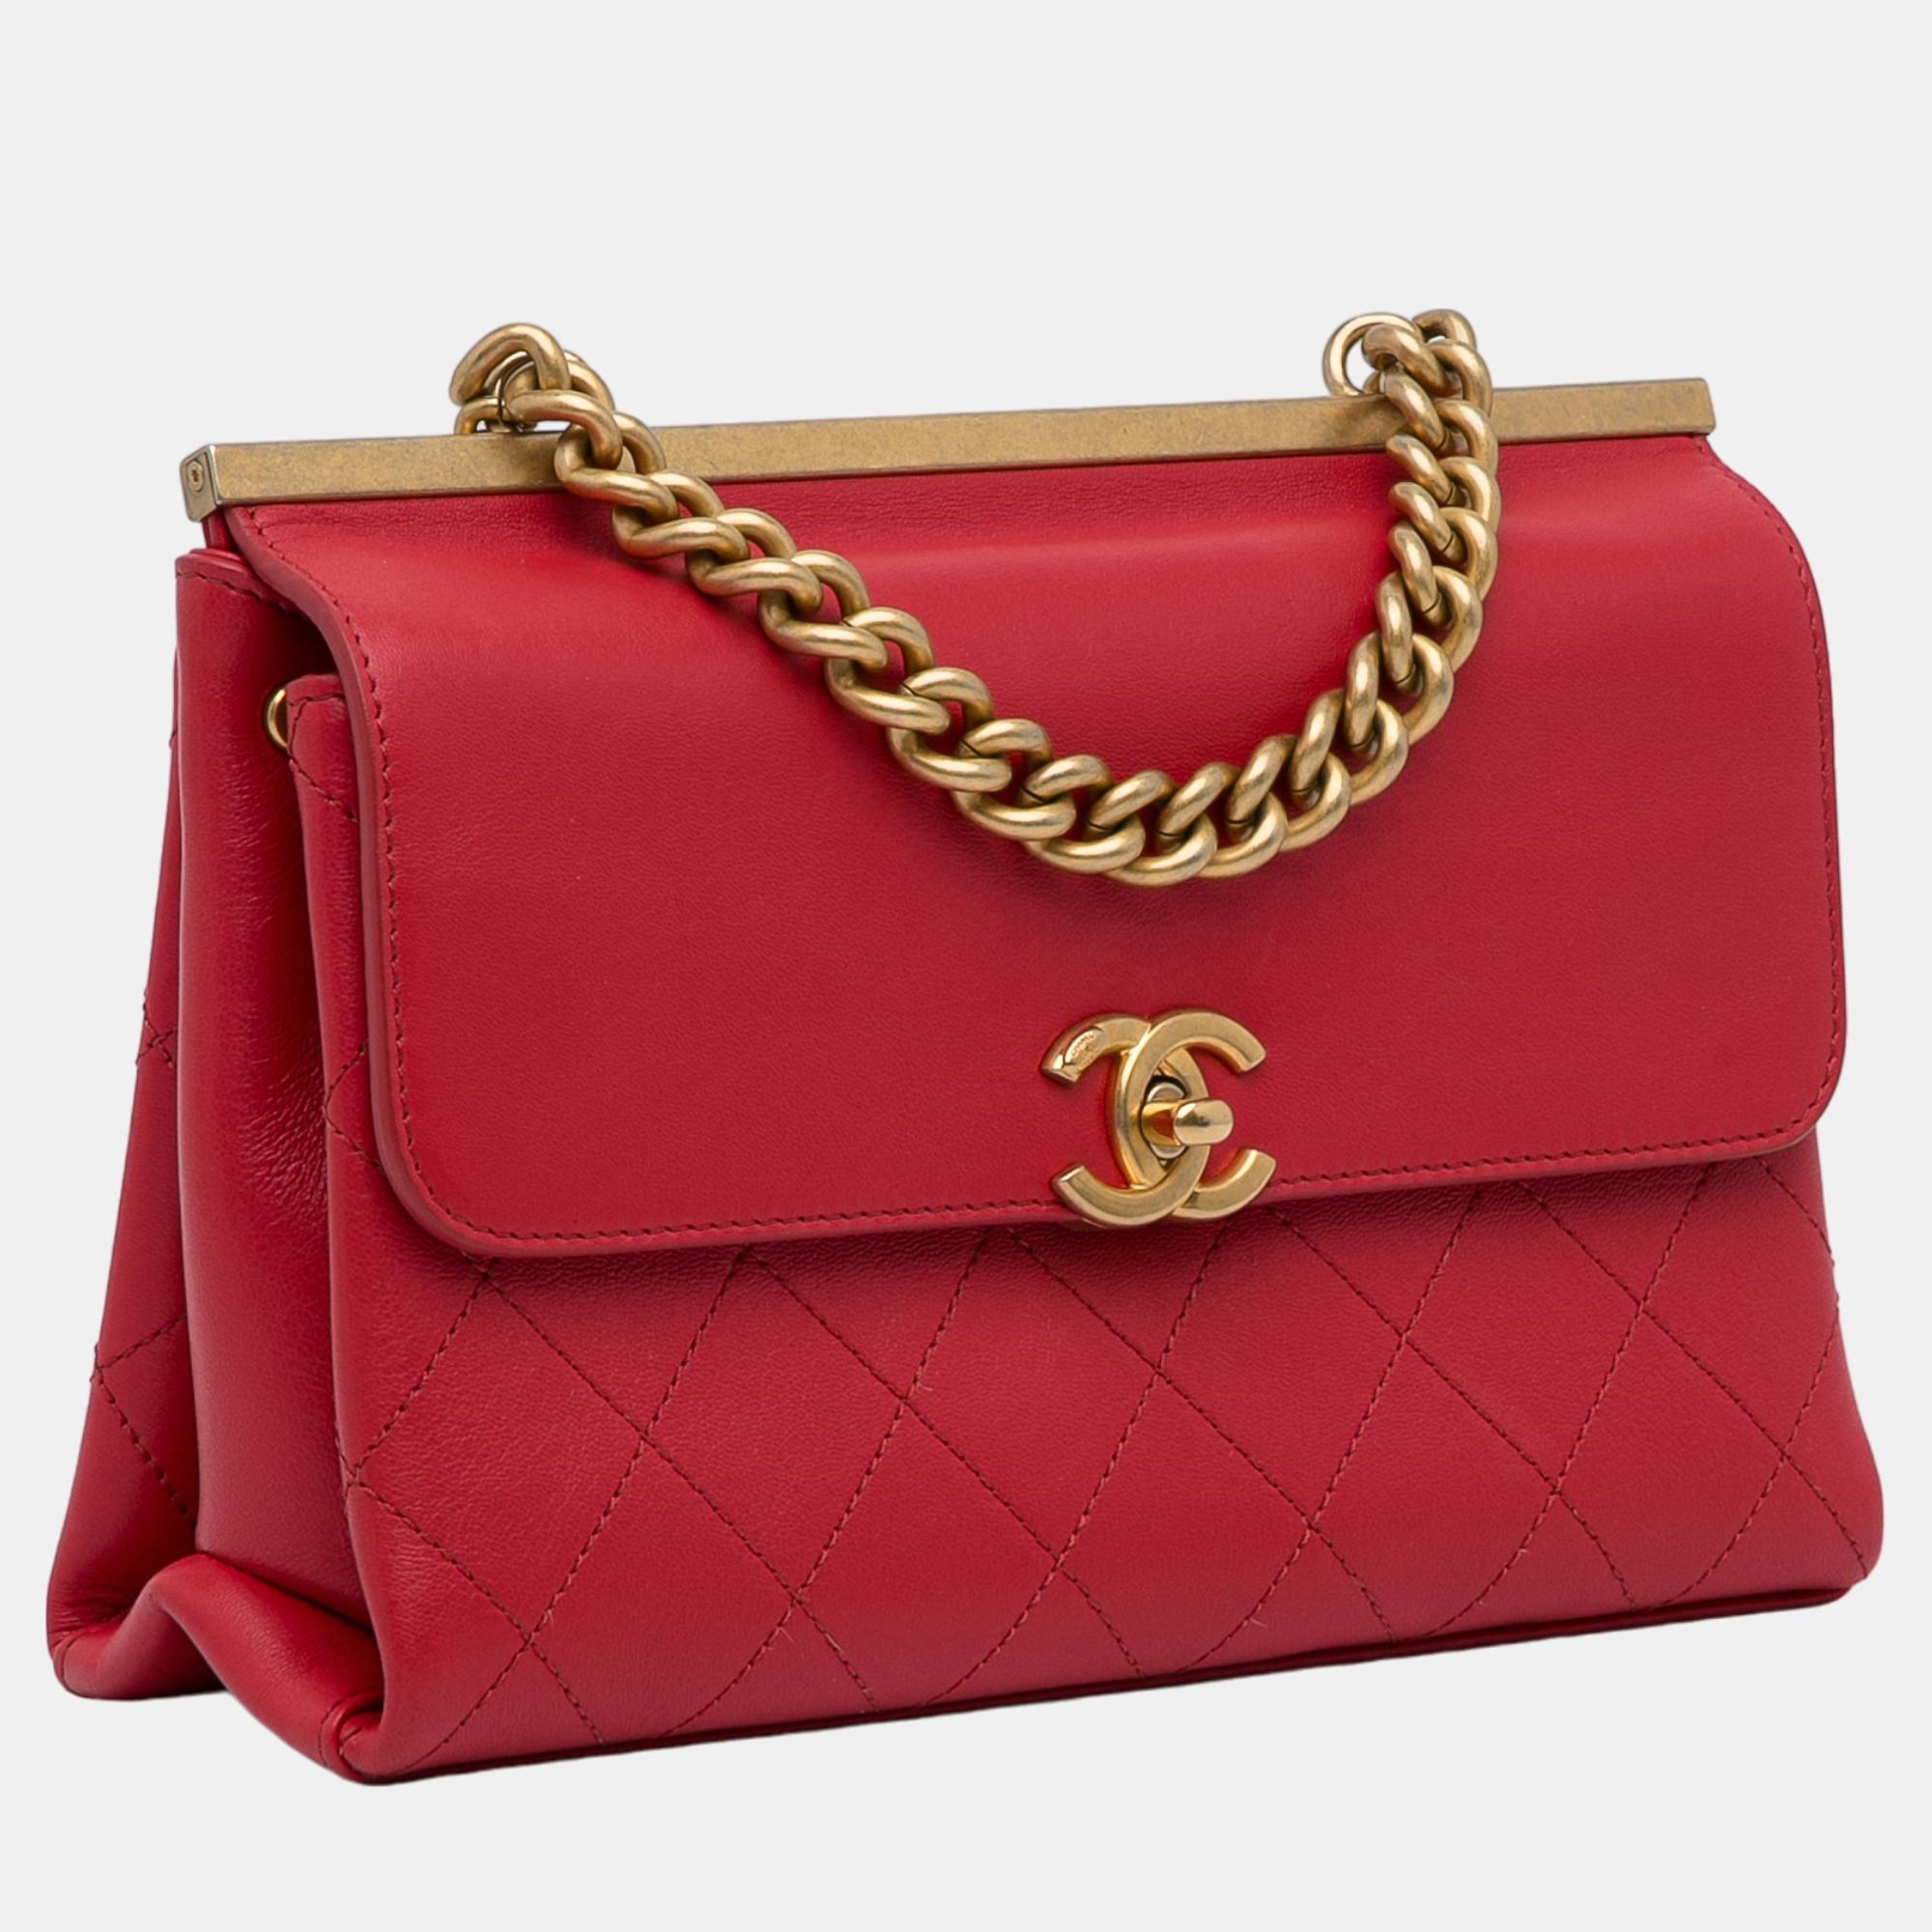 

Chanel Red Small Coco Luxe Flap Satchel